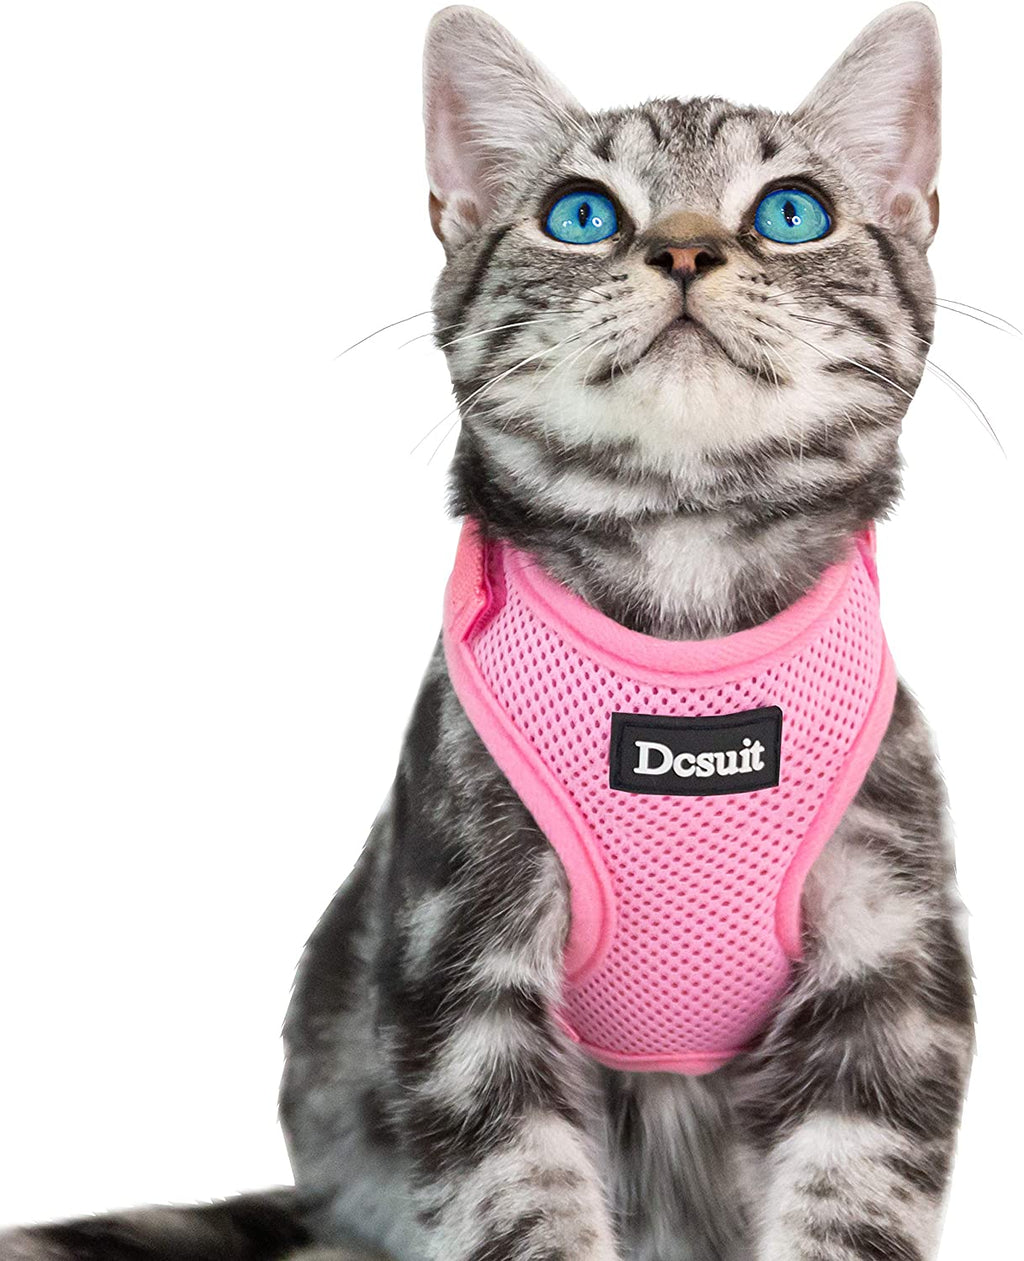 DCSUIT Cat Harness Leash Set - Escape Proof Safety Pink Cute Small Dog Soft  Mesh Breathable Full Body Vest Harness,Adjustable Comfort Fit for  Puppy/Kittens/Rabbits/Small Animals Easy Walking Outside